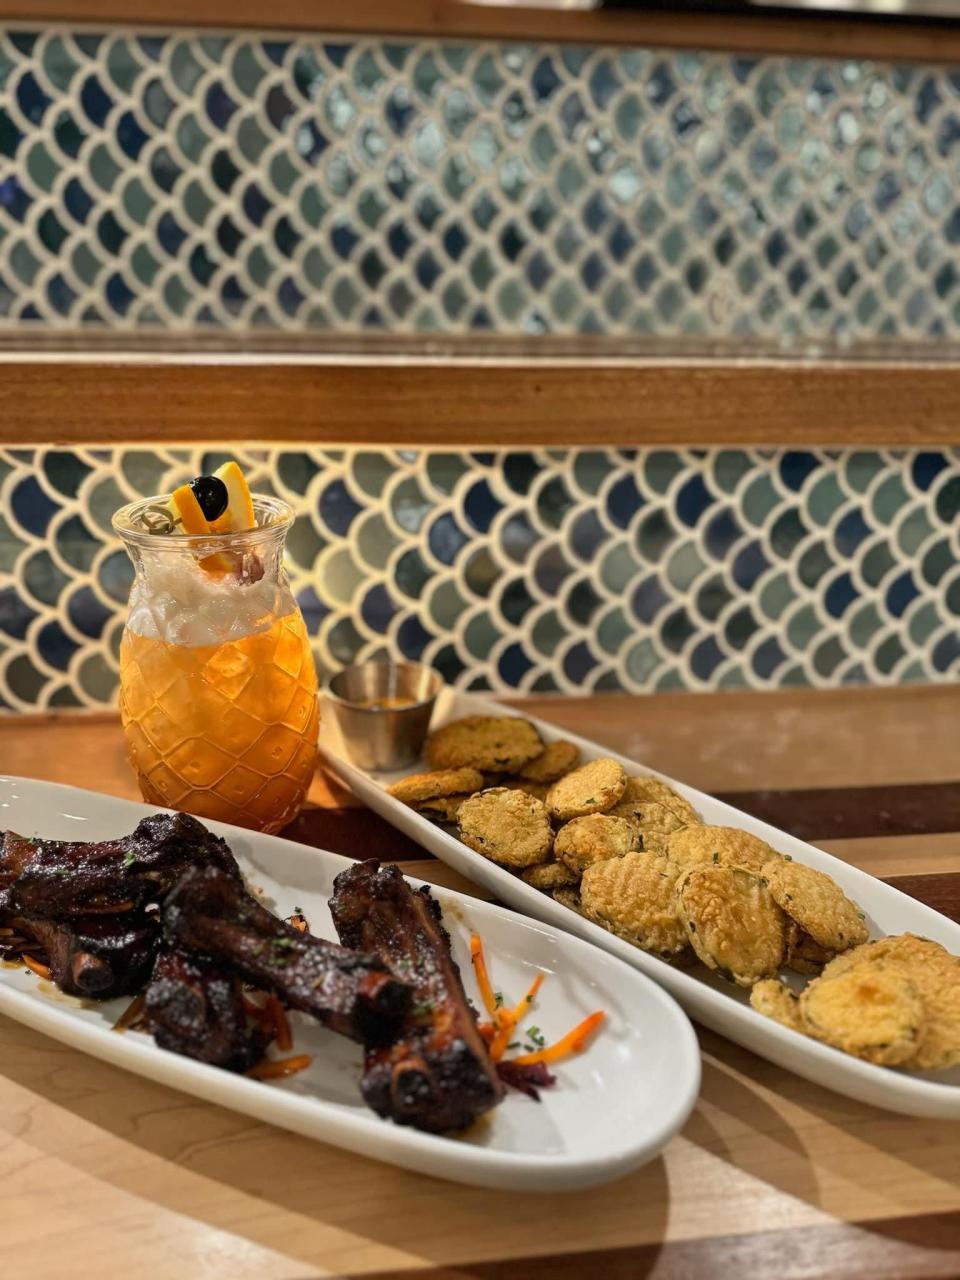 Wednesdays are for BBQ at Cisco Kitchen + Bar.